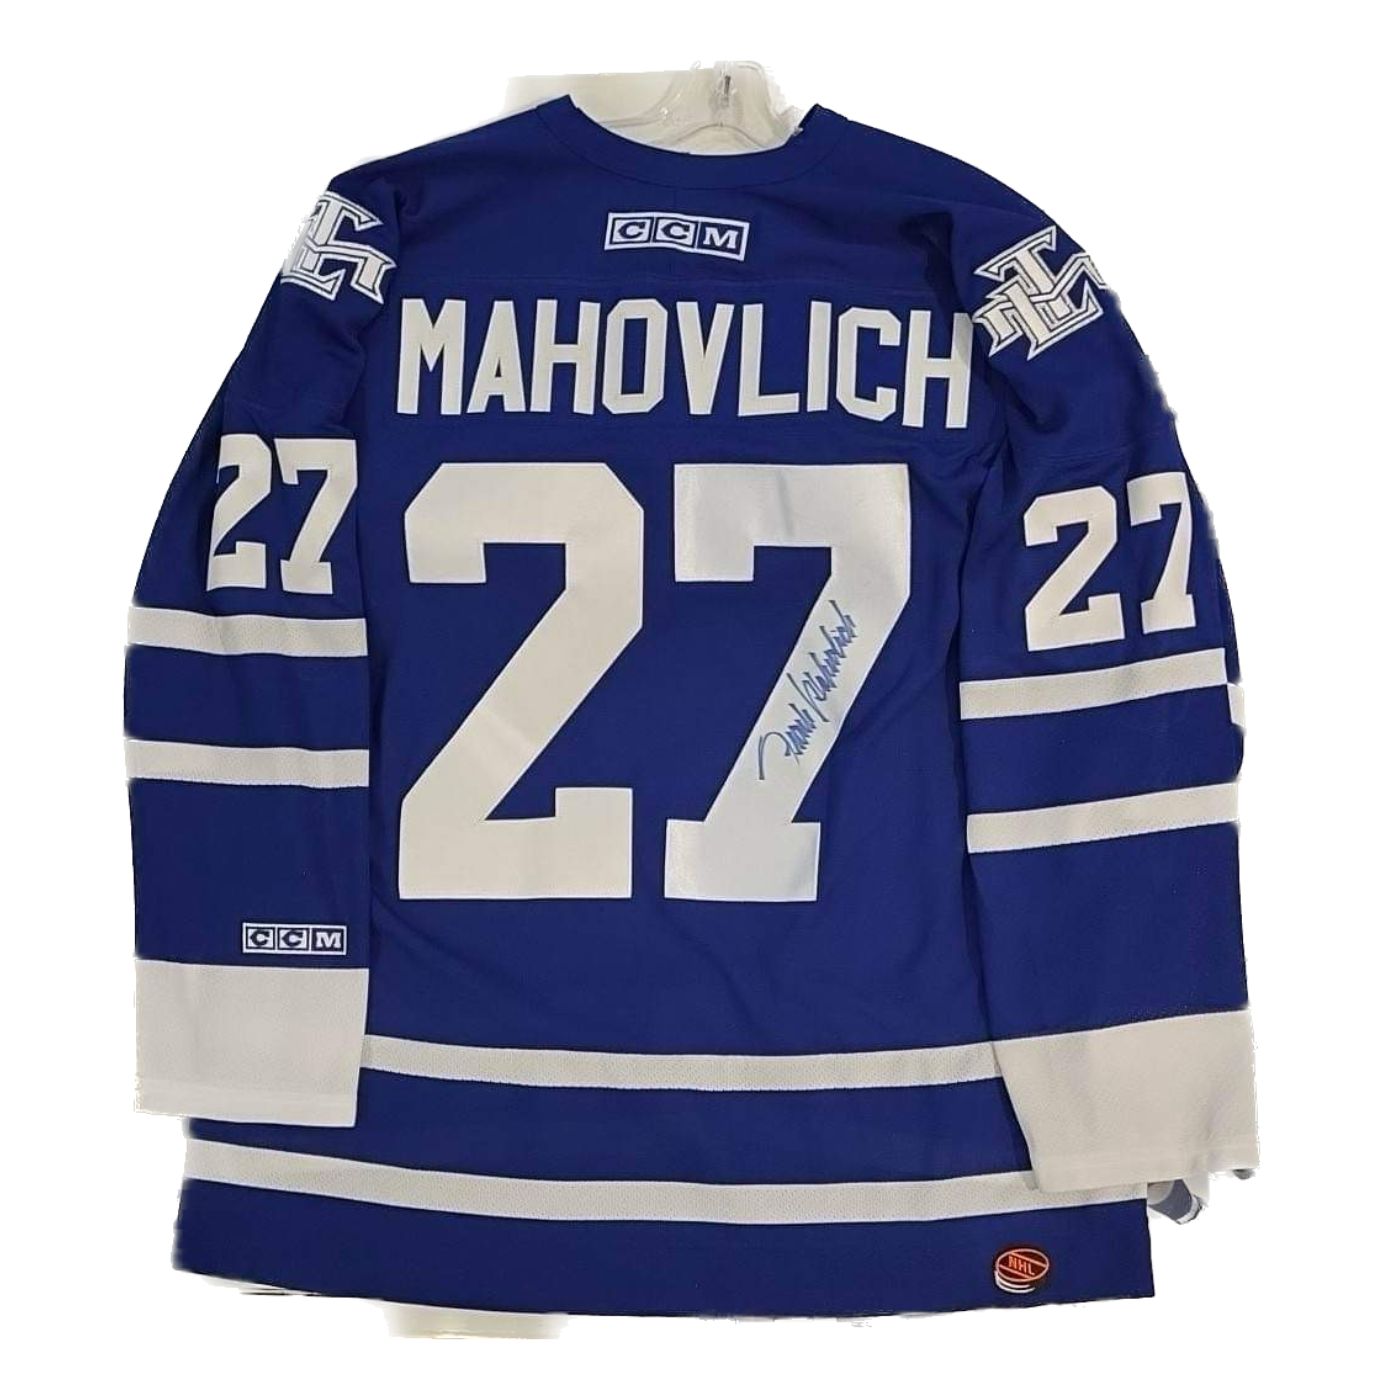 Frank Mahovlich Autographed Blue Toronto Maple Leafs Jersey at